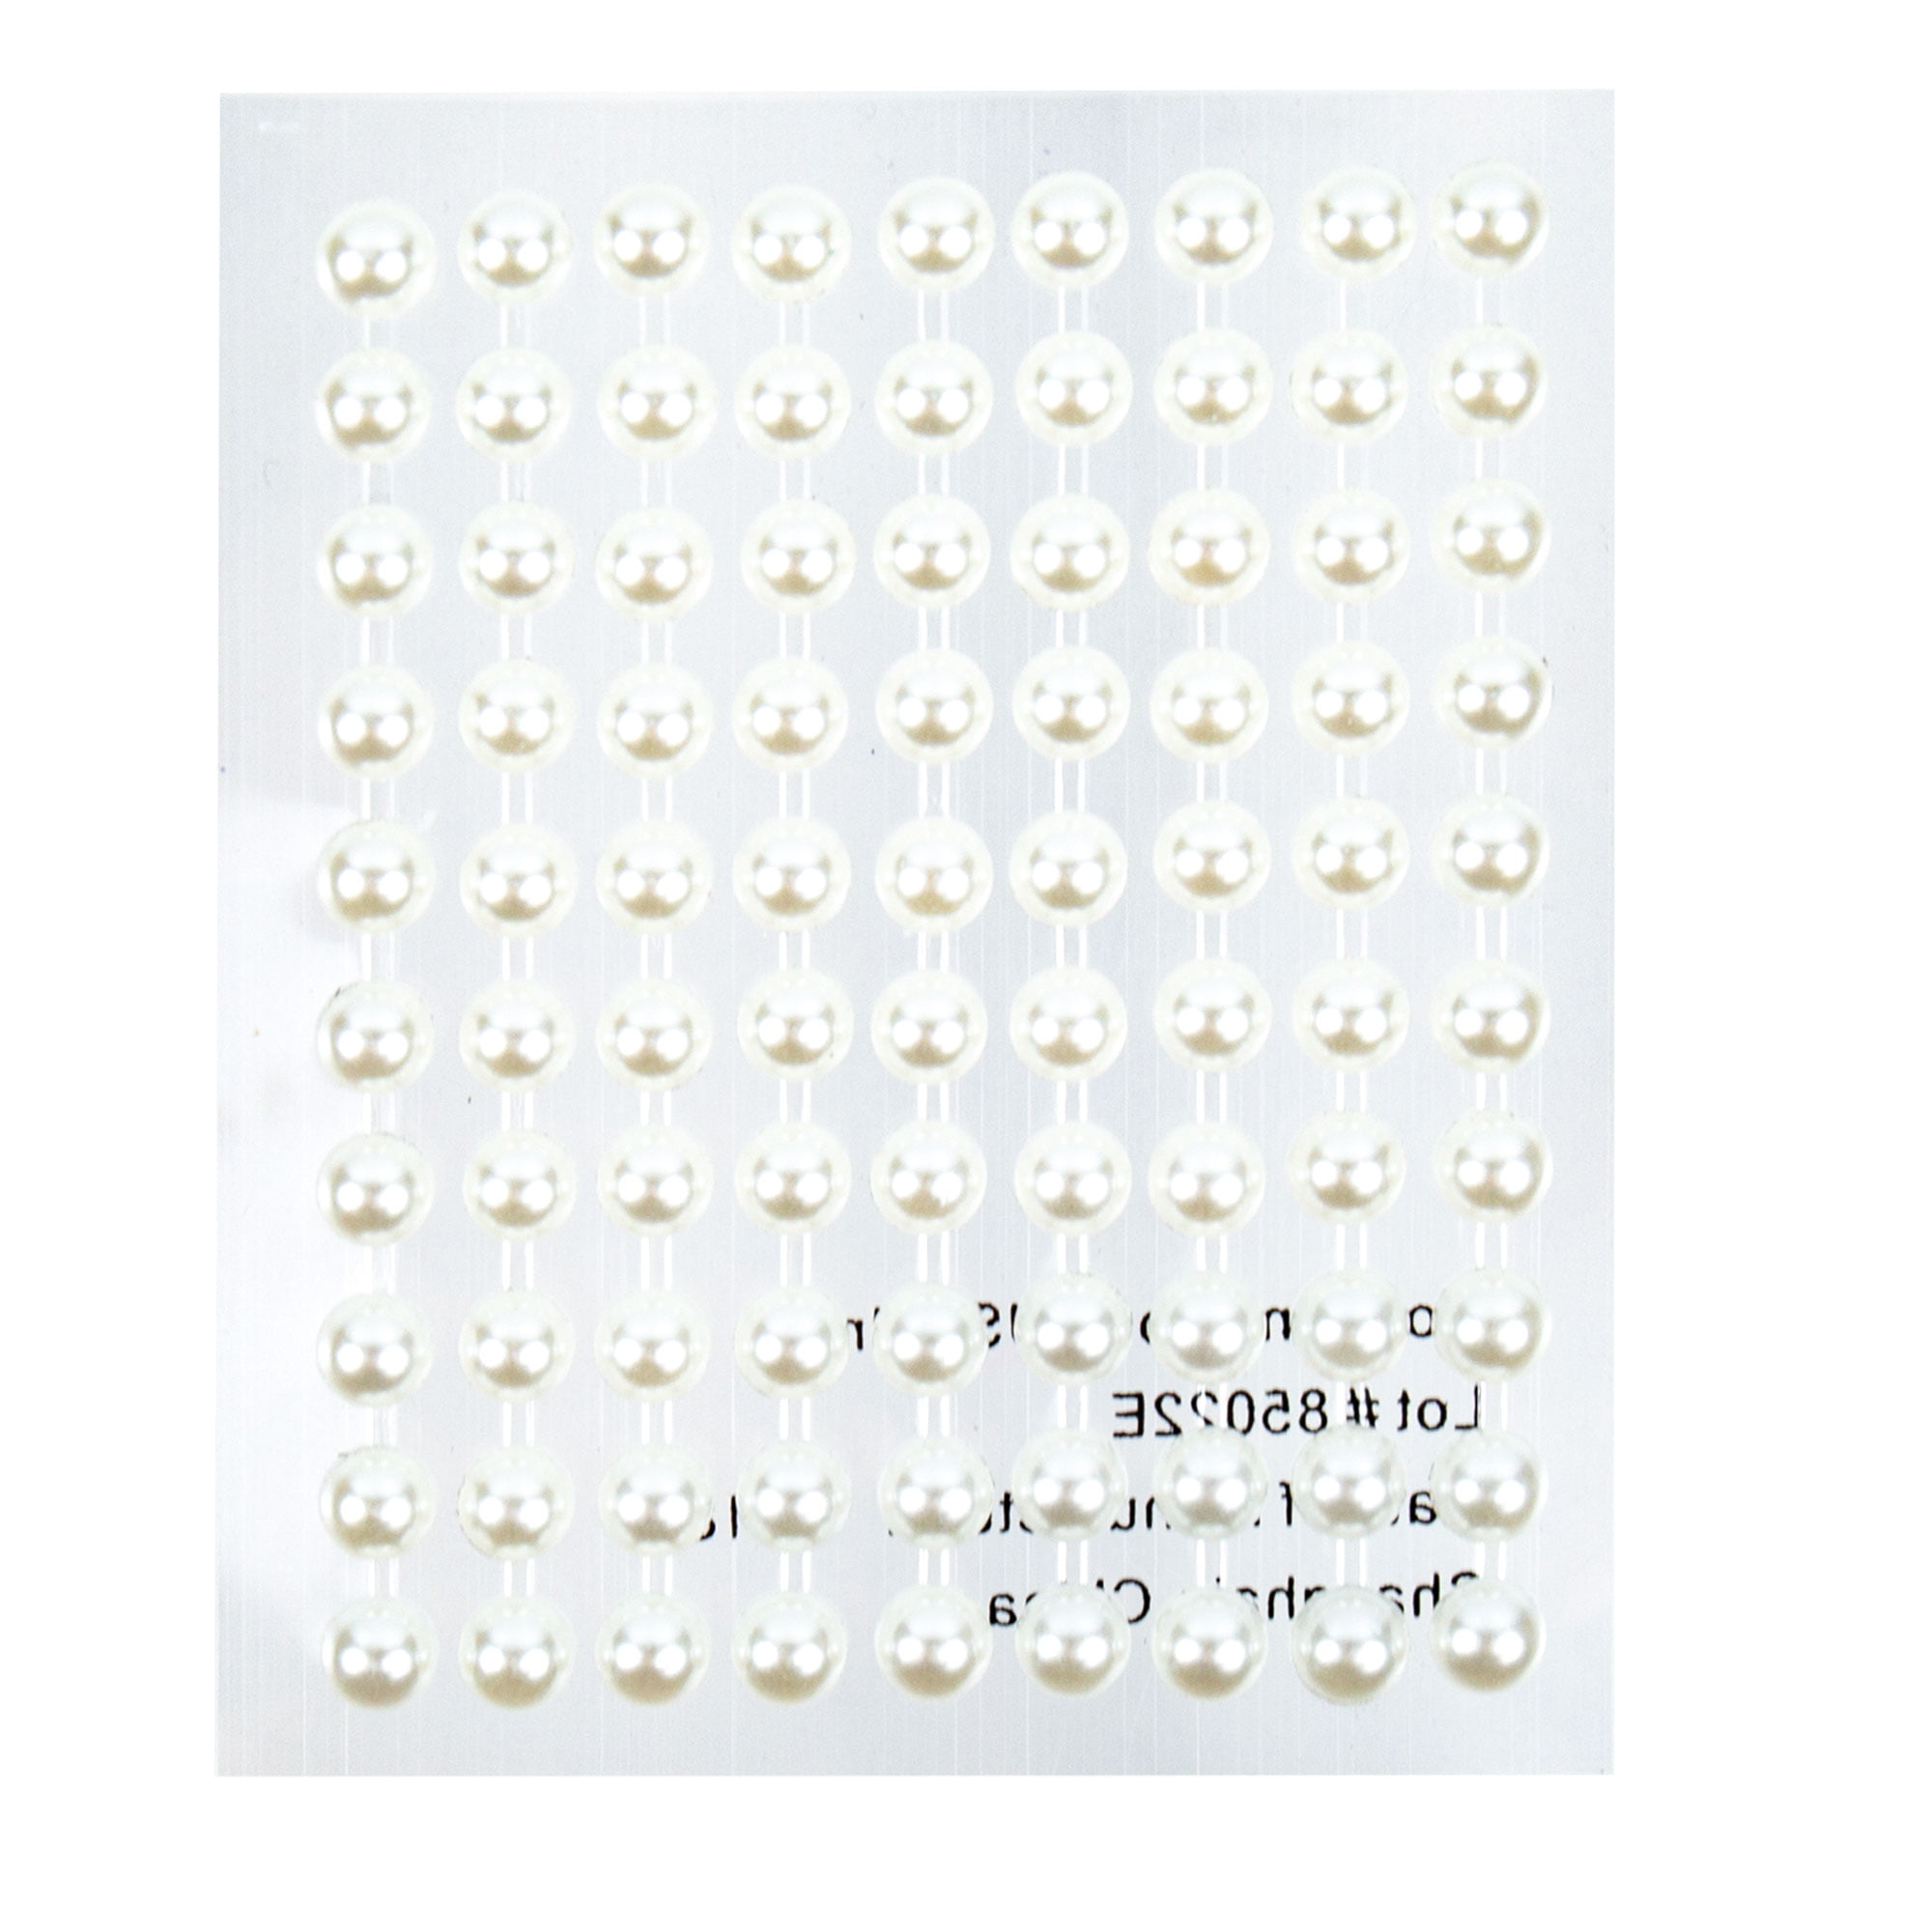 4mm Self Adhesive Pearls sheet of 100 Pearl Stickers Small Stick on Pearls  DIY Invitation Decorations Card Making 